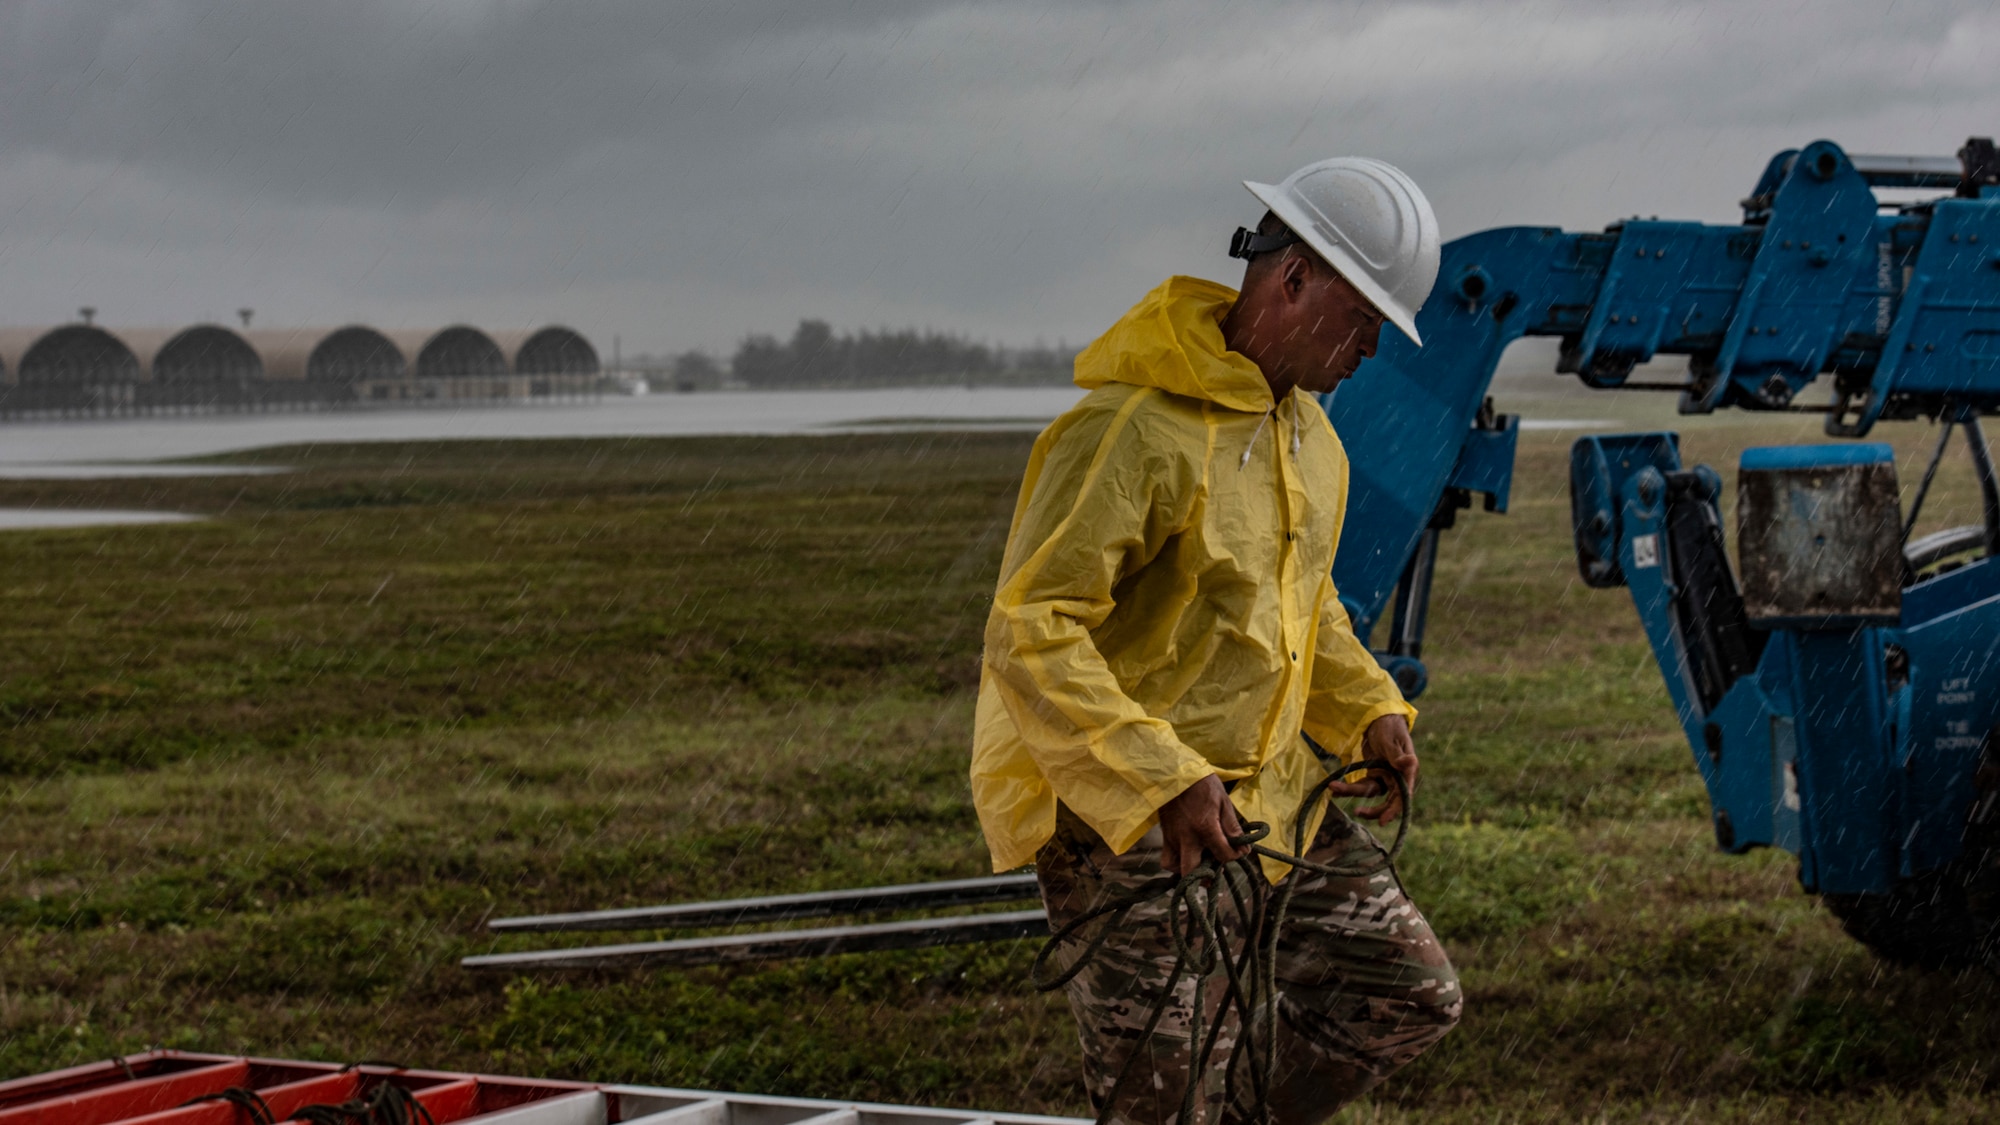 U.S. Air Force Master Sgt. Jeremy Lawson, 36th Civil Engineer Squadron heavy repair section chief, carries a trail line in the rain on Andersen Air Force Base, Guam, April 26, 2021.